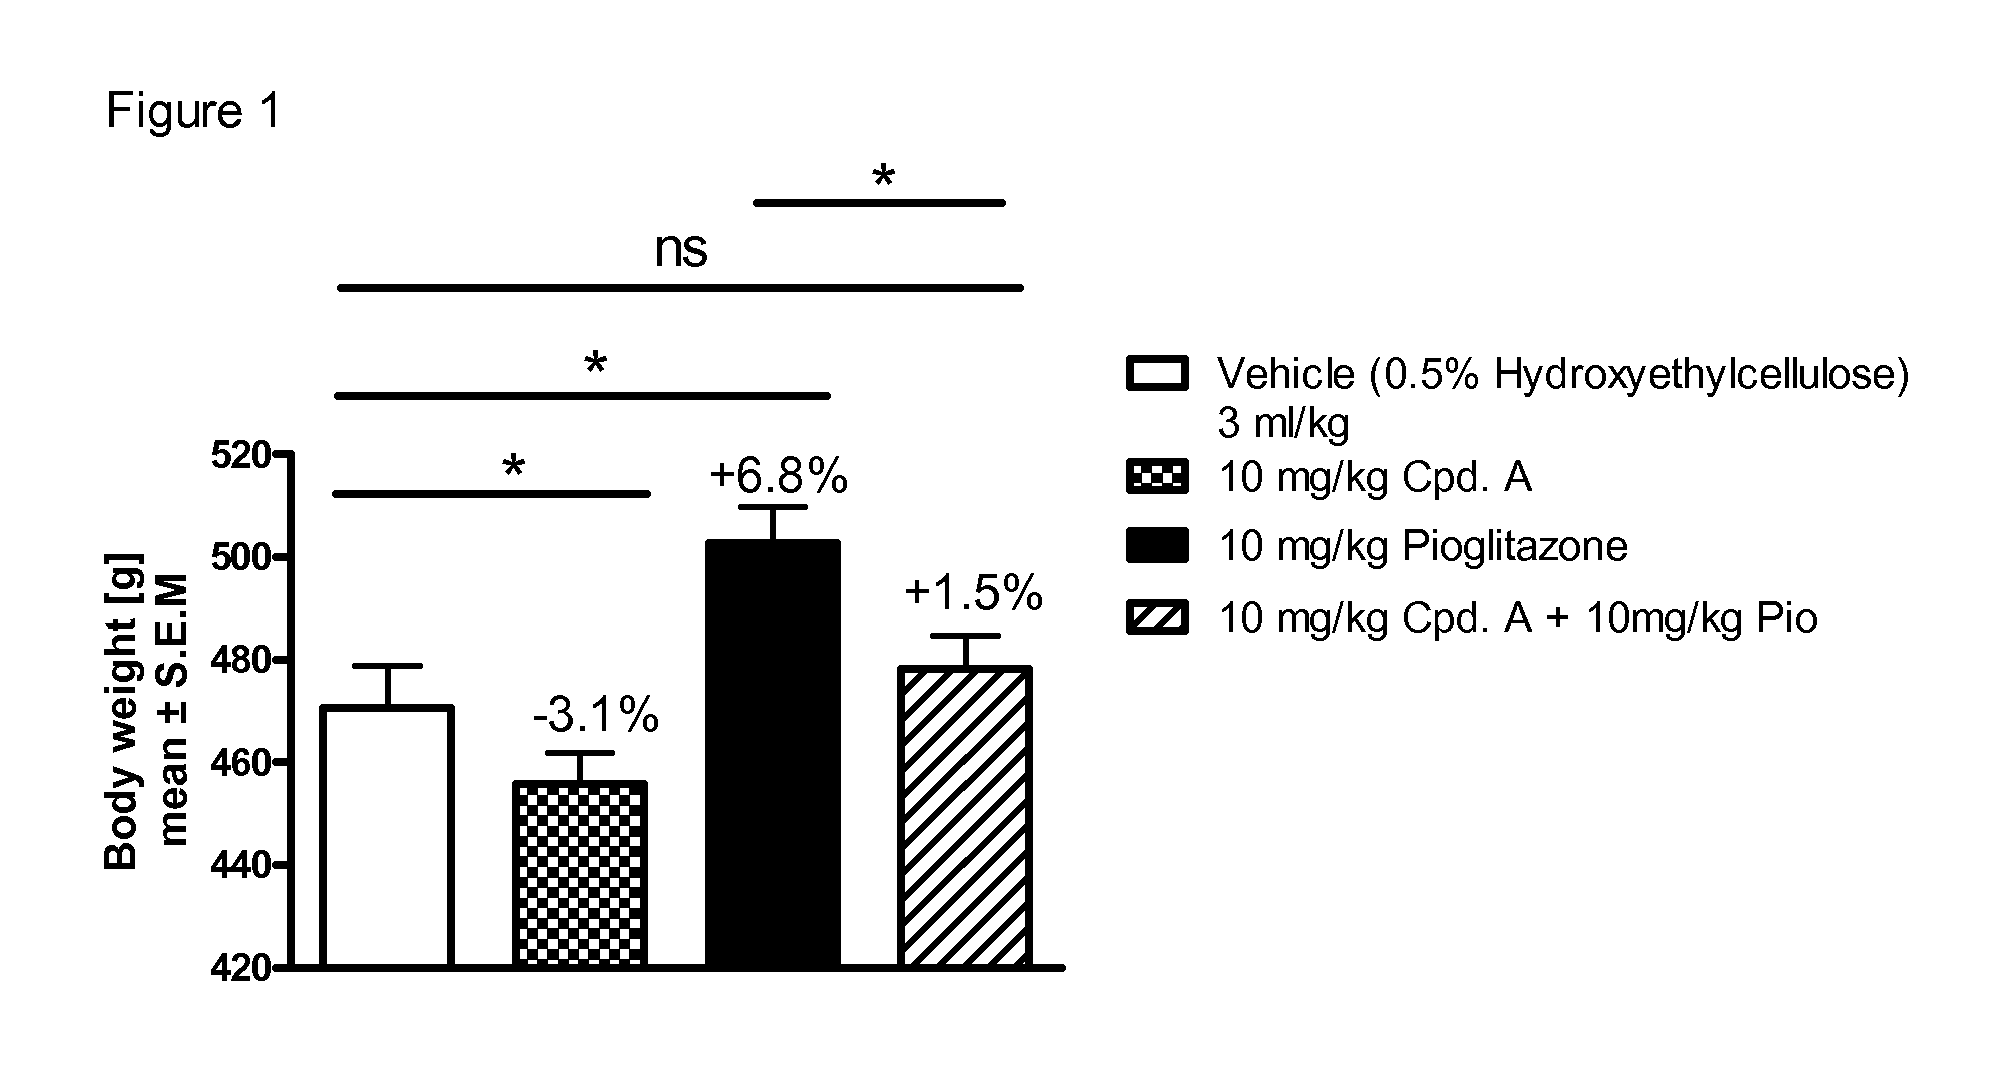 Pharmaceutical composition comprising an sglt2 inhibitor and a ppar- gamma agonist and uses thereof